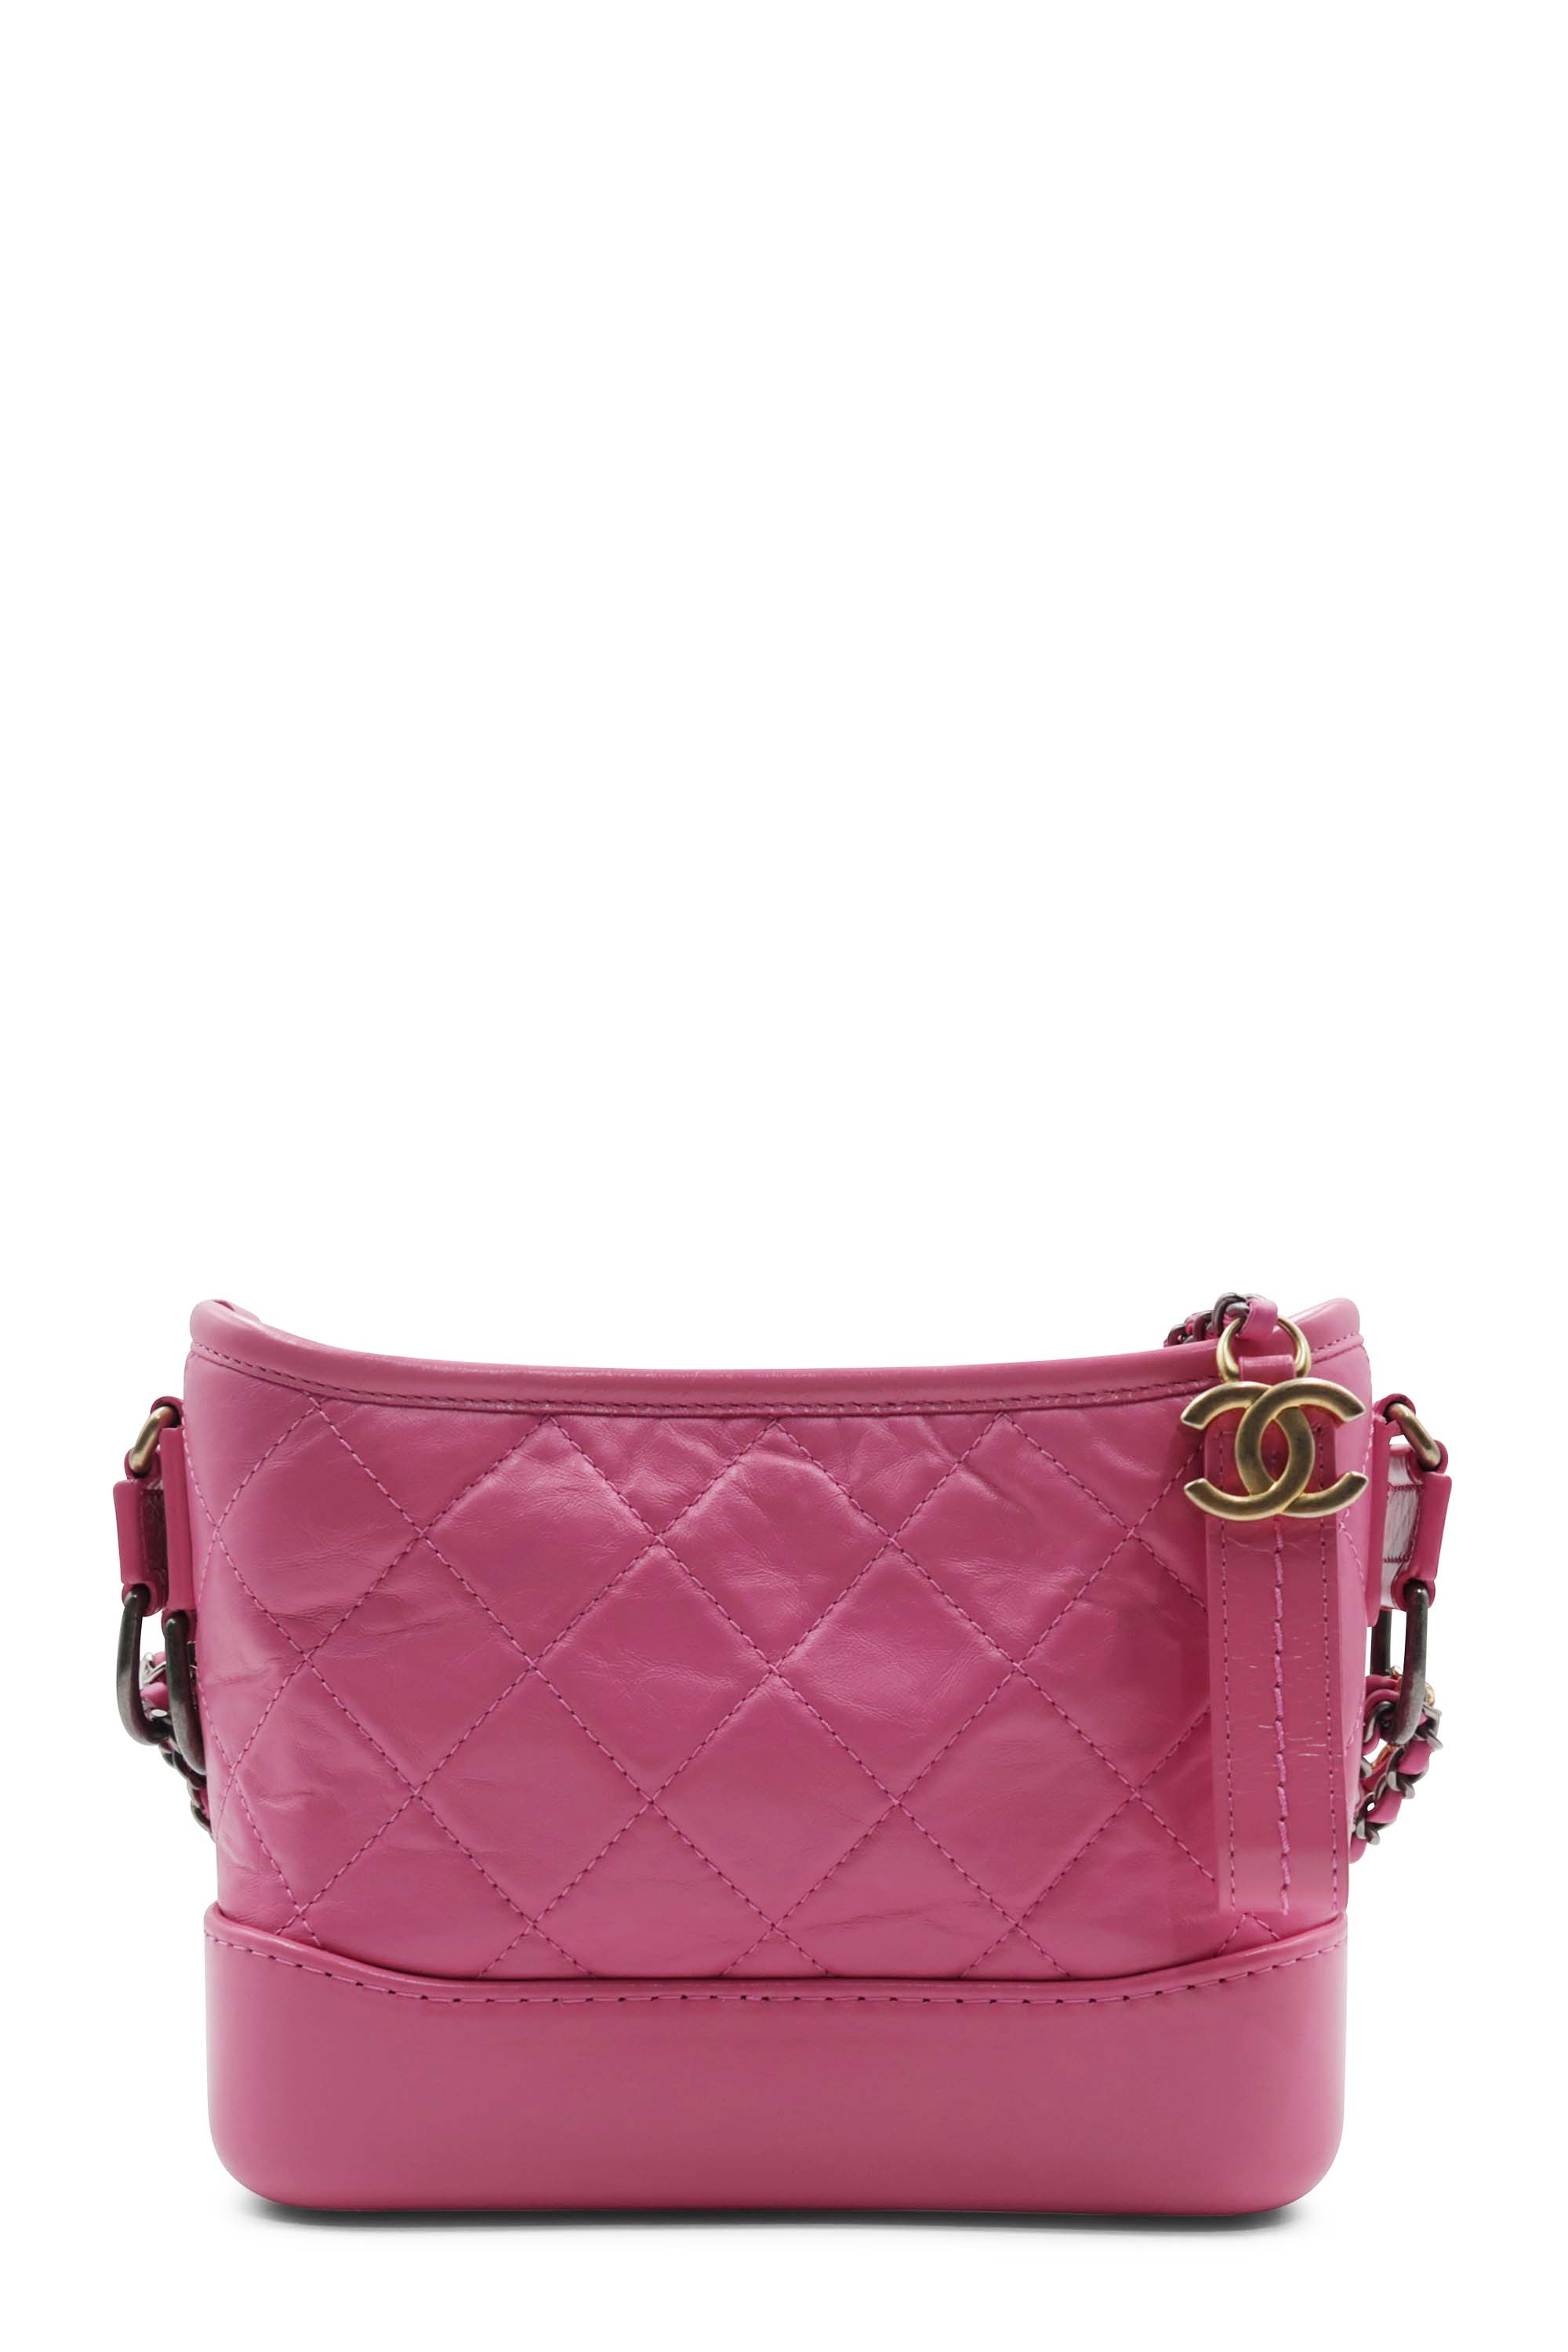 CHANEL Aged Calfskin Quilted Small Gabrielle Hobo Pink 447744  FASHIONPHILE